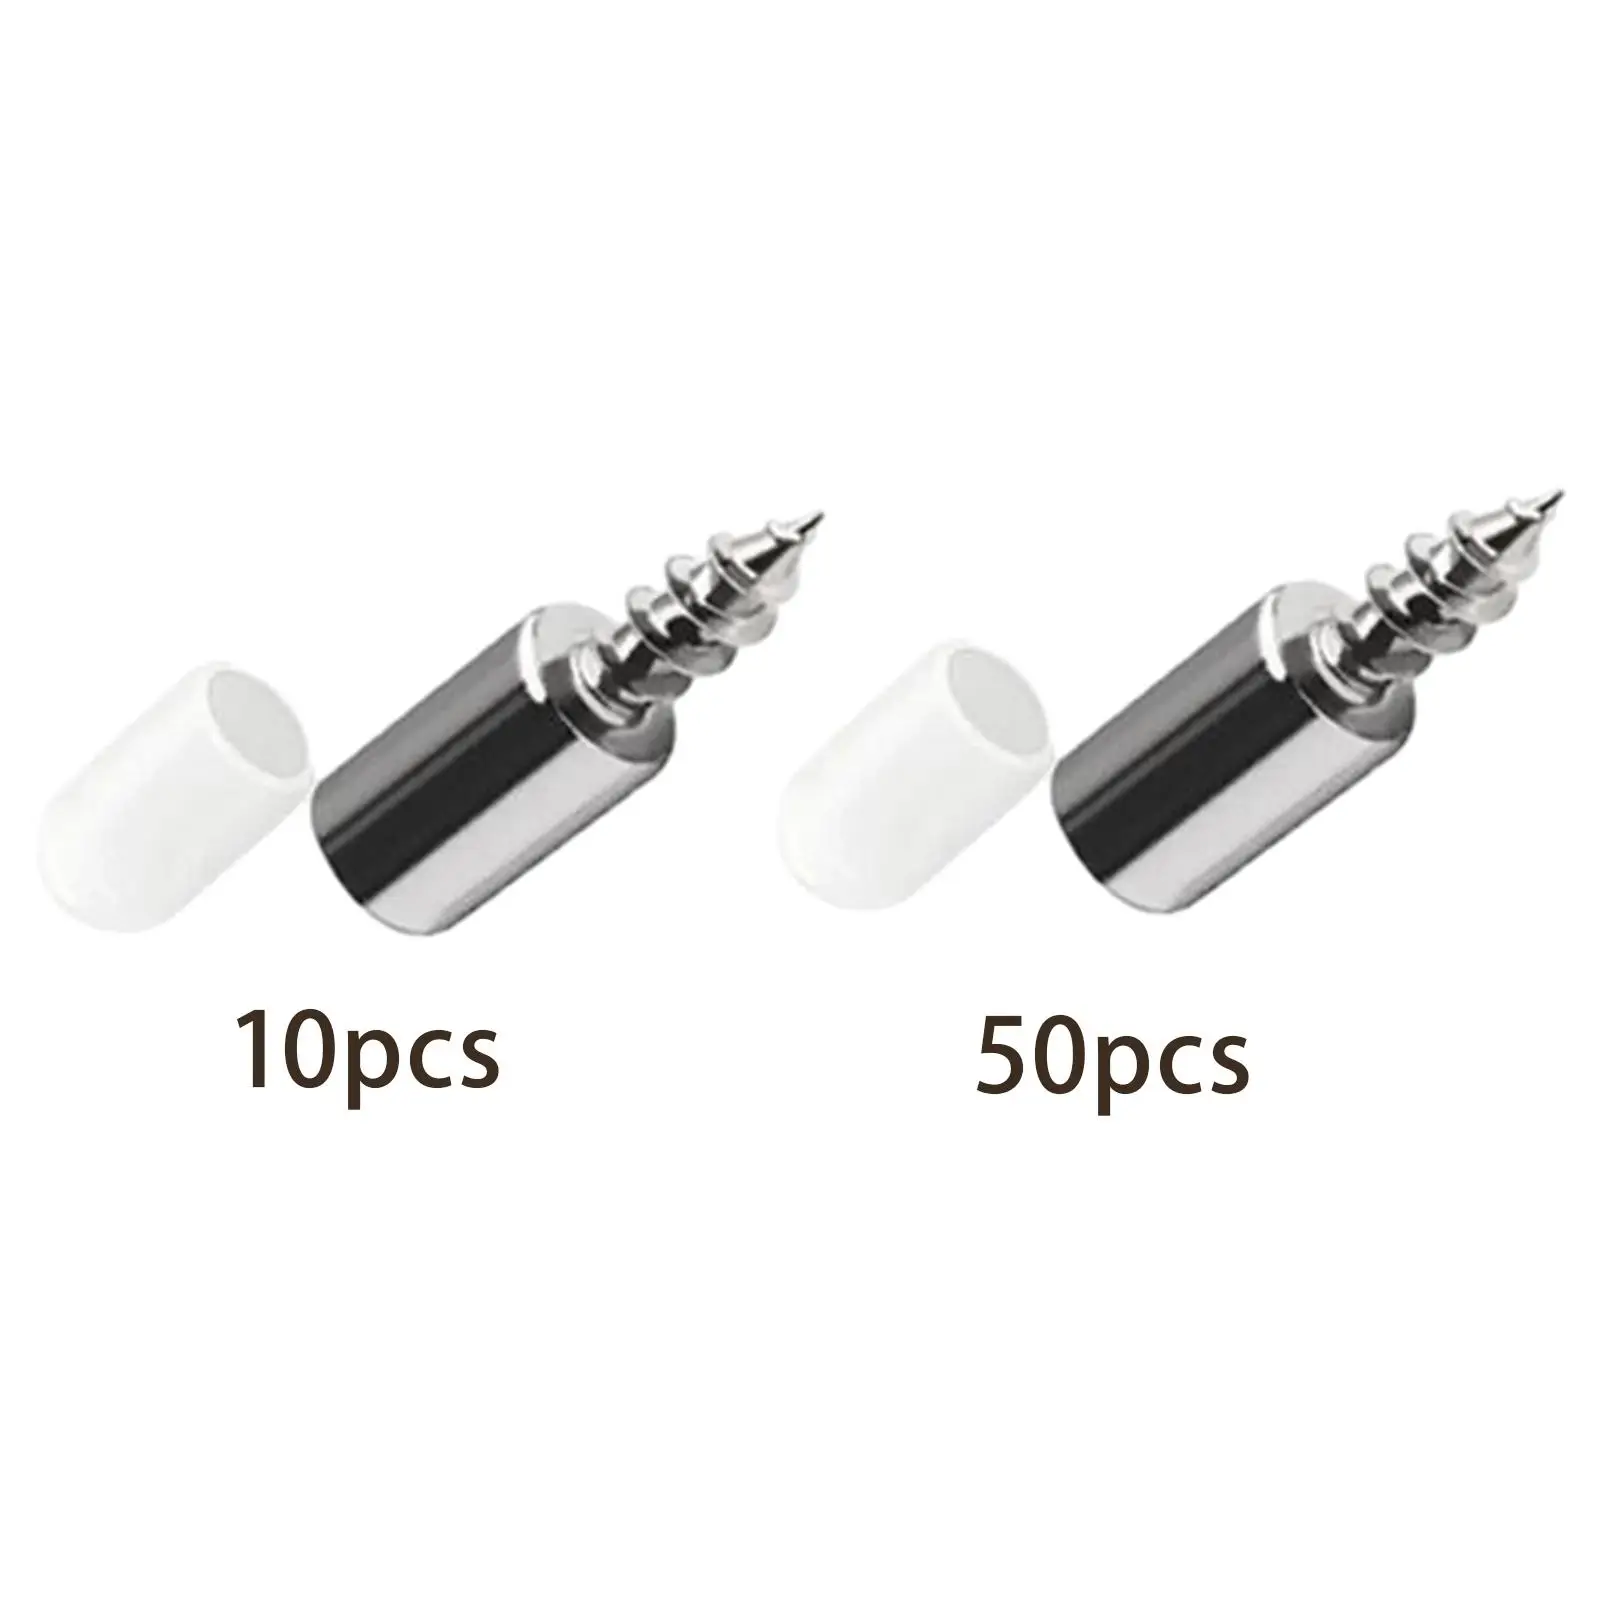 Self Tapping Screws Non Punching Clapboard Holder with Non Slip Silicone Sleeves Self Drill Screws for Cabinet Cupboard Shelf